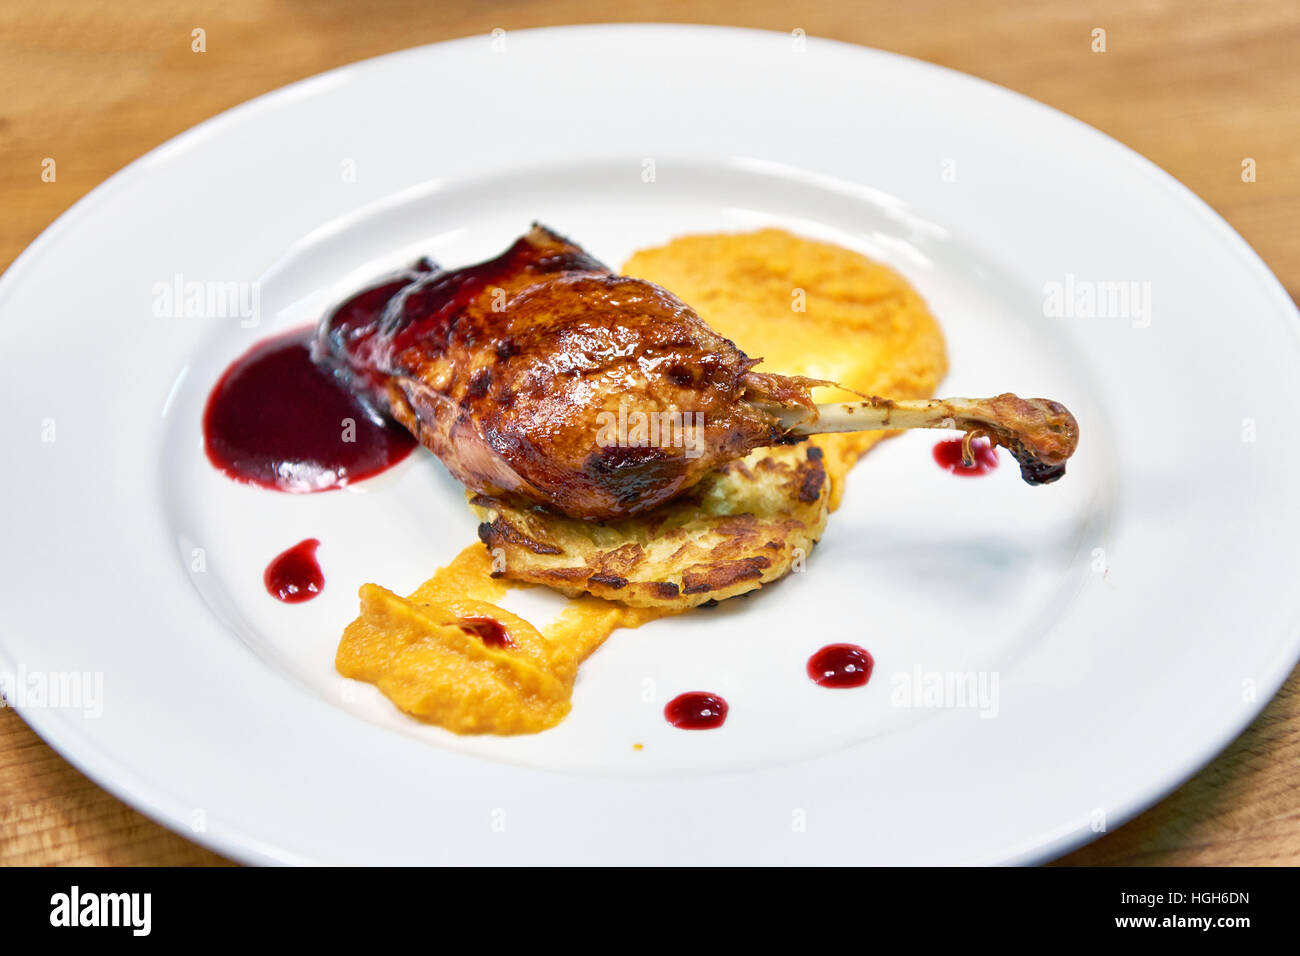 Roasted duck thigh with vegetable cutlet with sauce Stock Photo